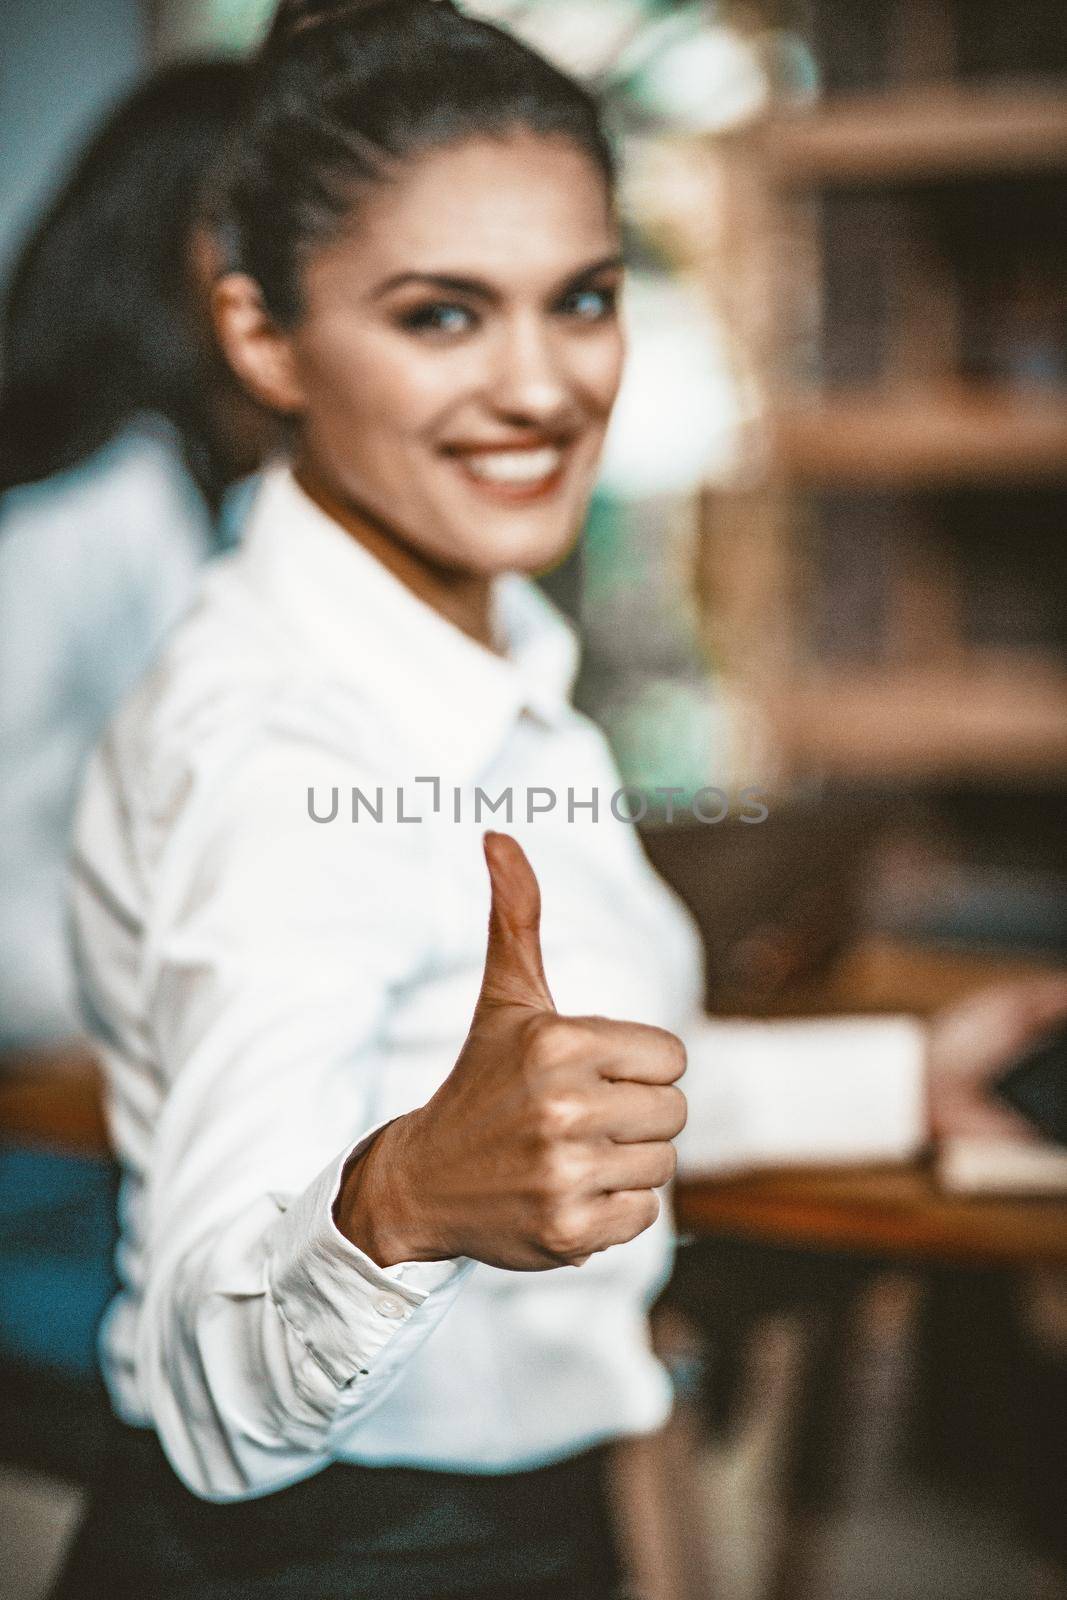 Smiling businesswoman shows Thumbs Up Gesture by LipikStockMedia